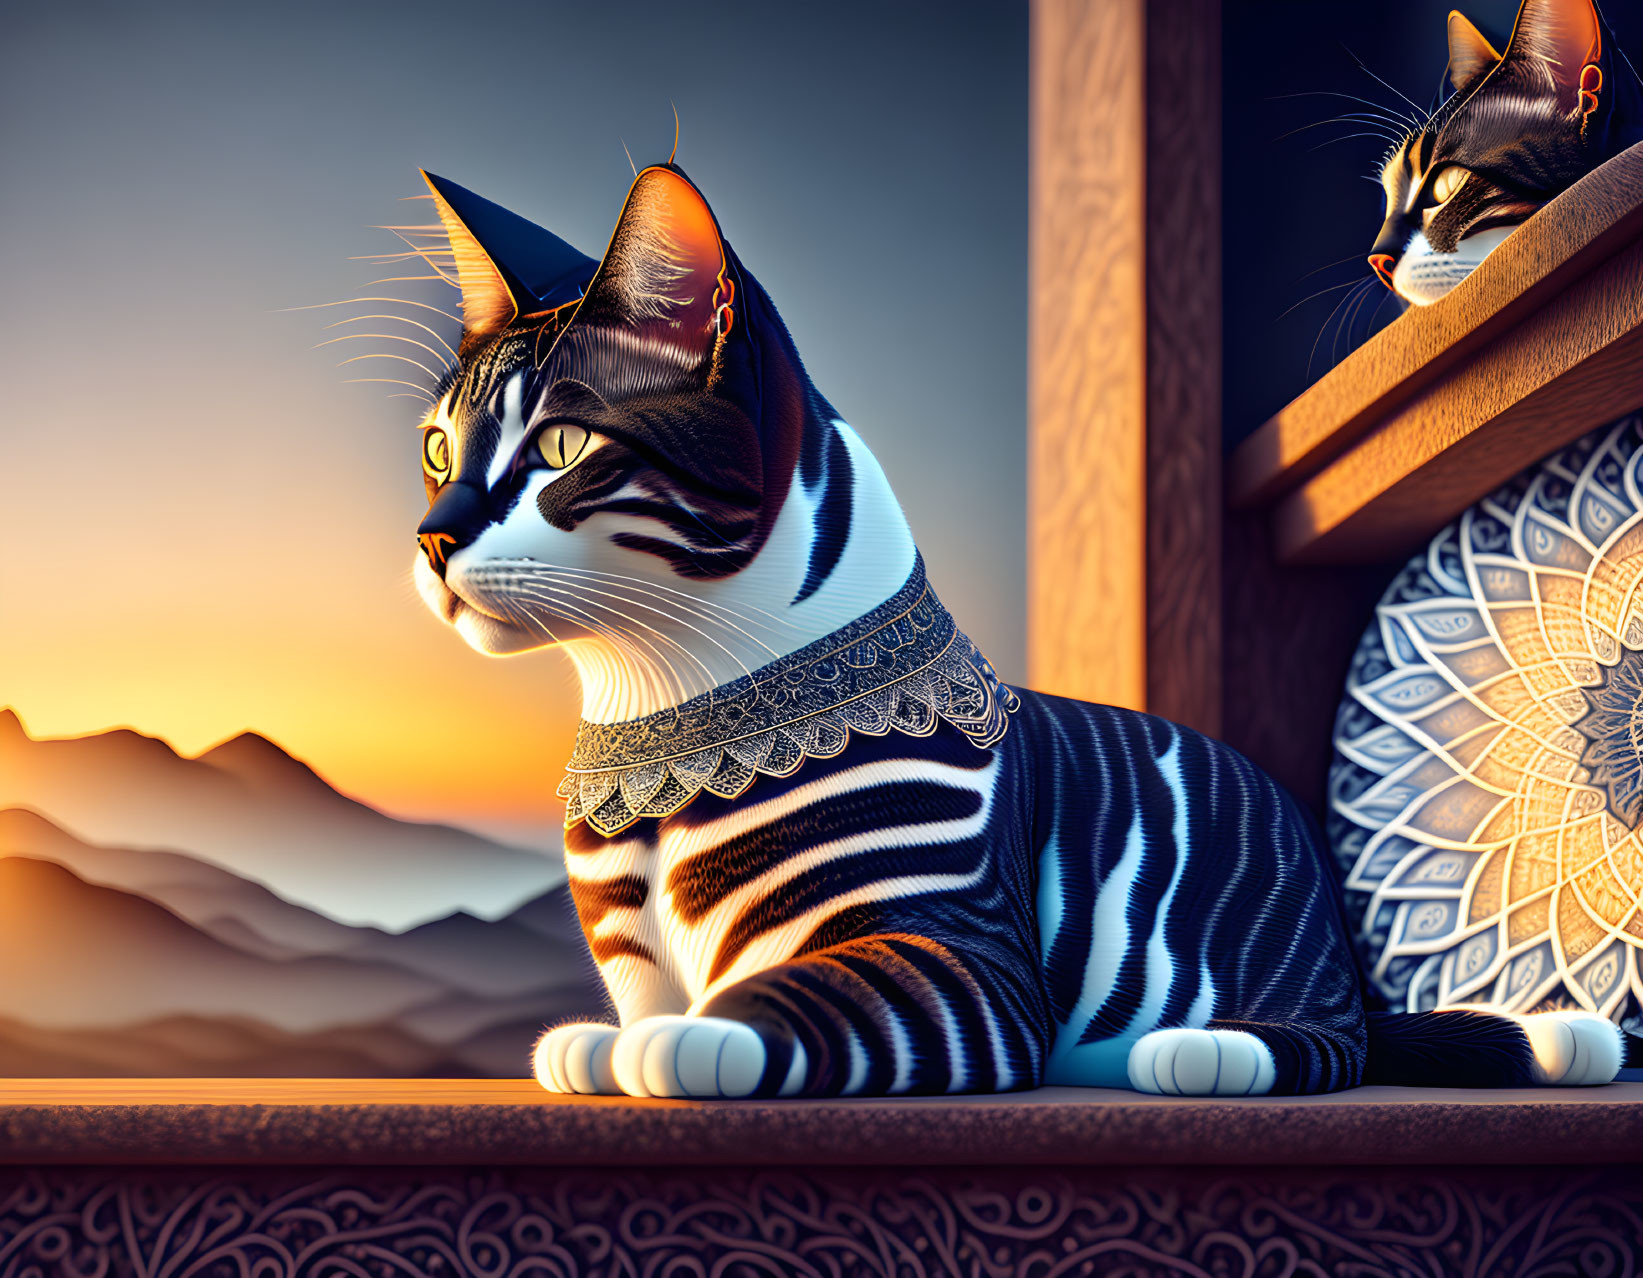 Stylized cats with intricate fur patterns by a sunset-lit window